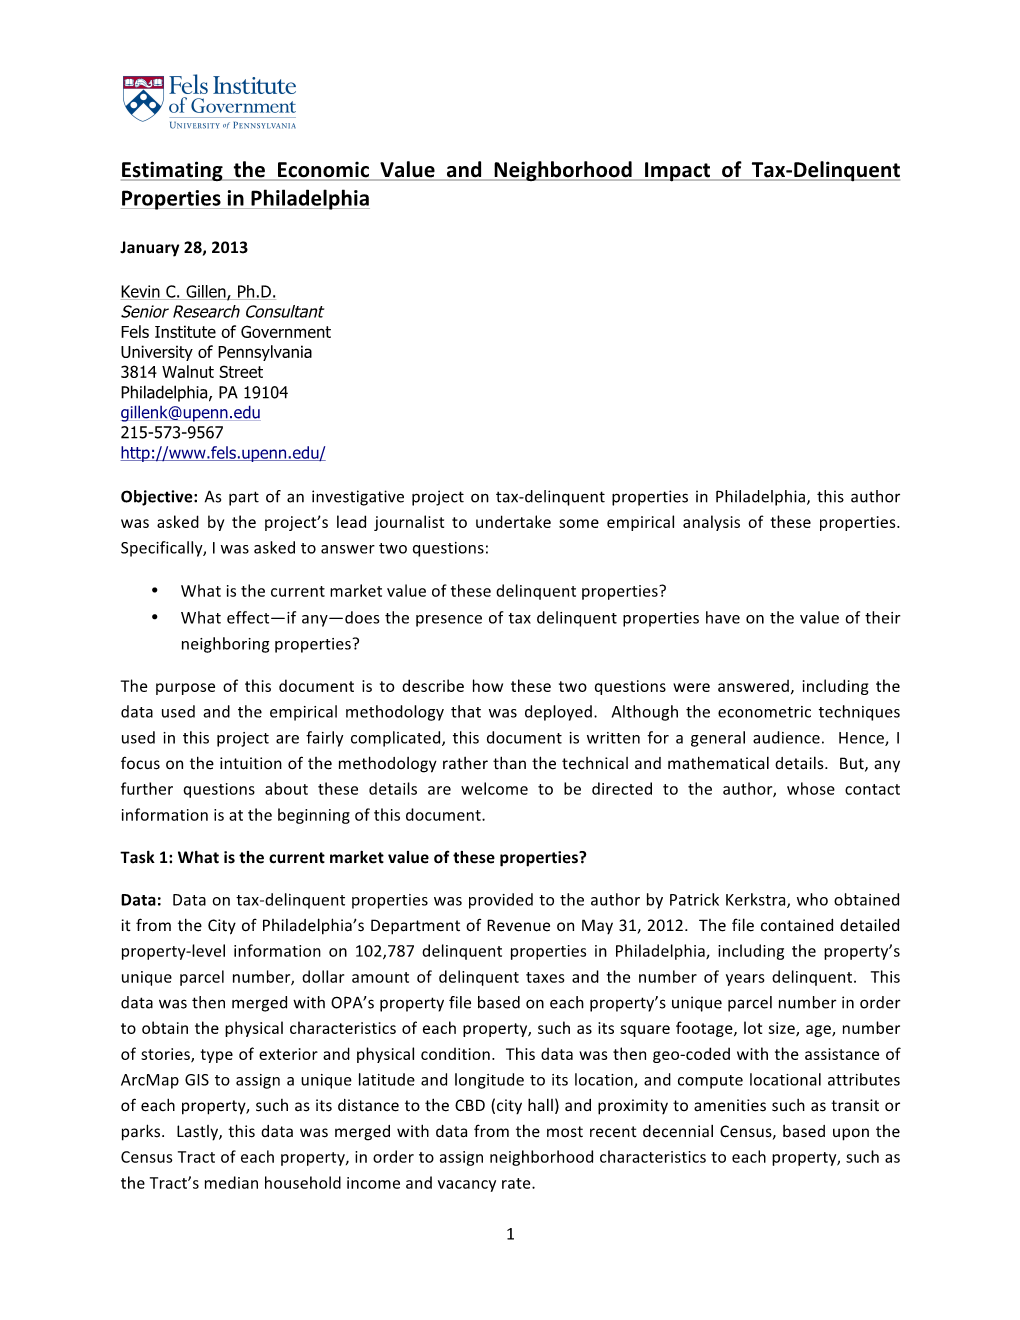 Estimating the Economic Value and Neighborhood Impact of Tax-Delinquent Properties in Philadelphia